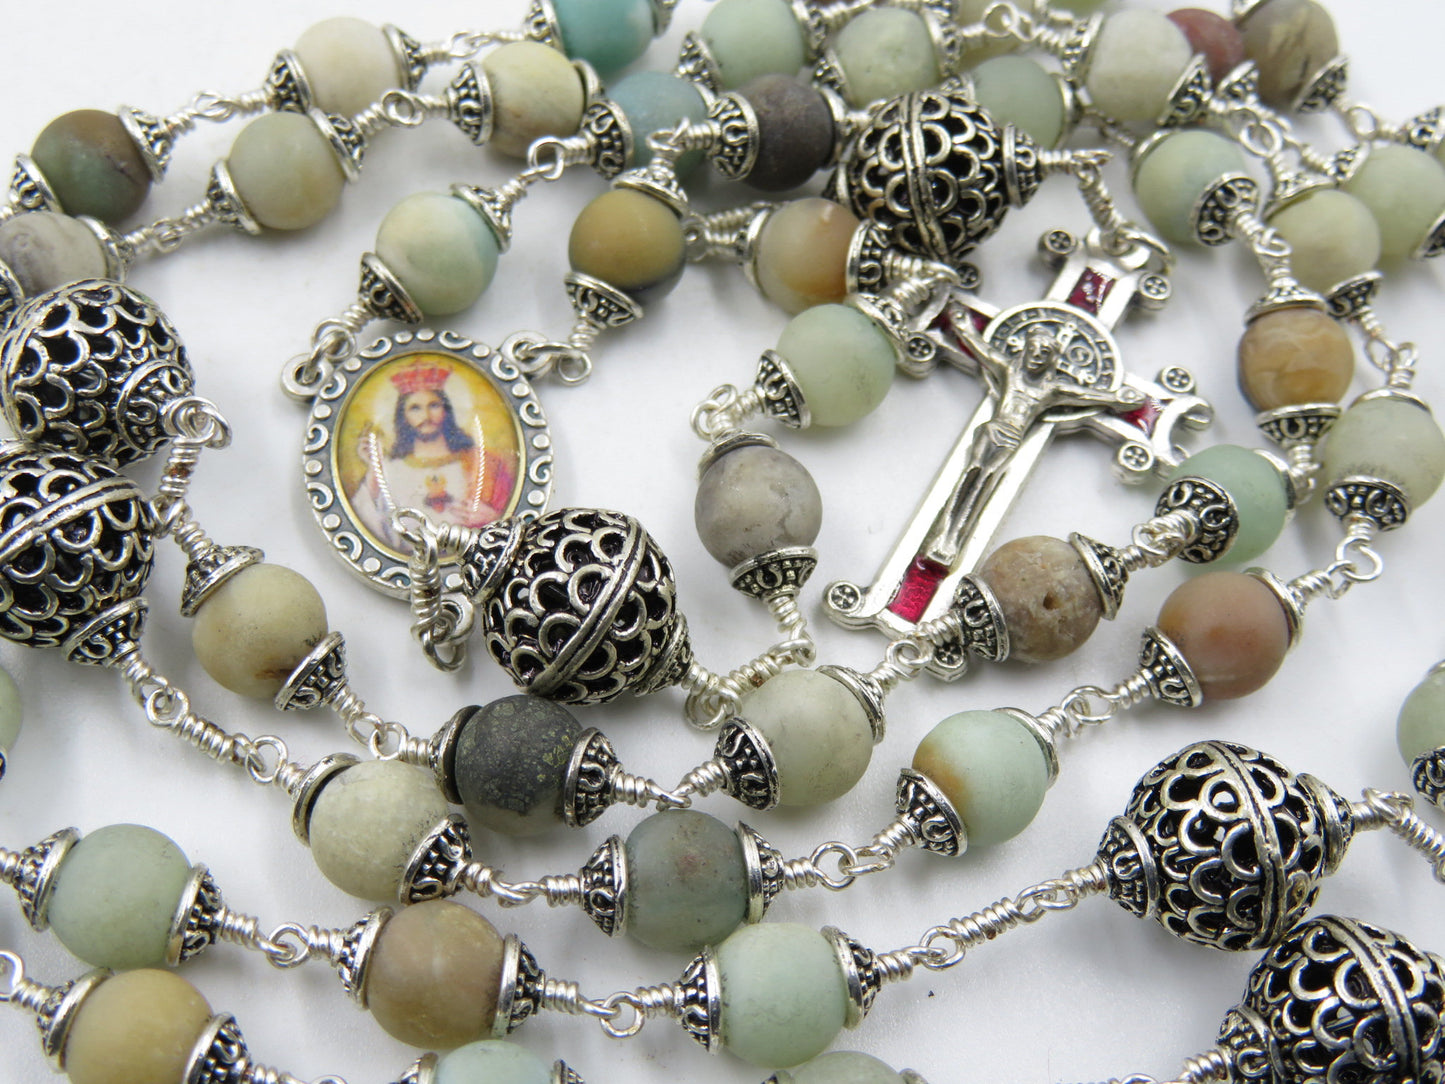 Unbreakable wire wrapped Rosary Beads, Sacred Heart Rosaries, St Benedict Rosary, Amazonite Gemstone prayer beads, Religious Wedding gift